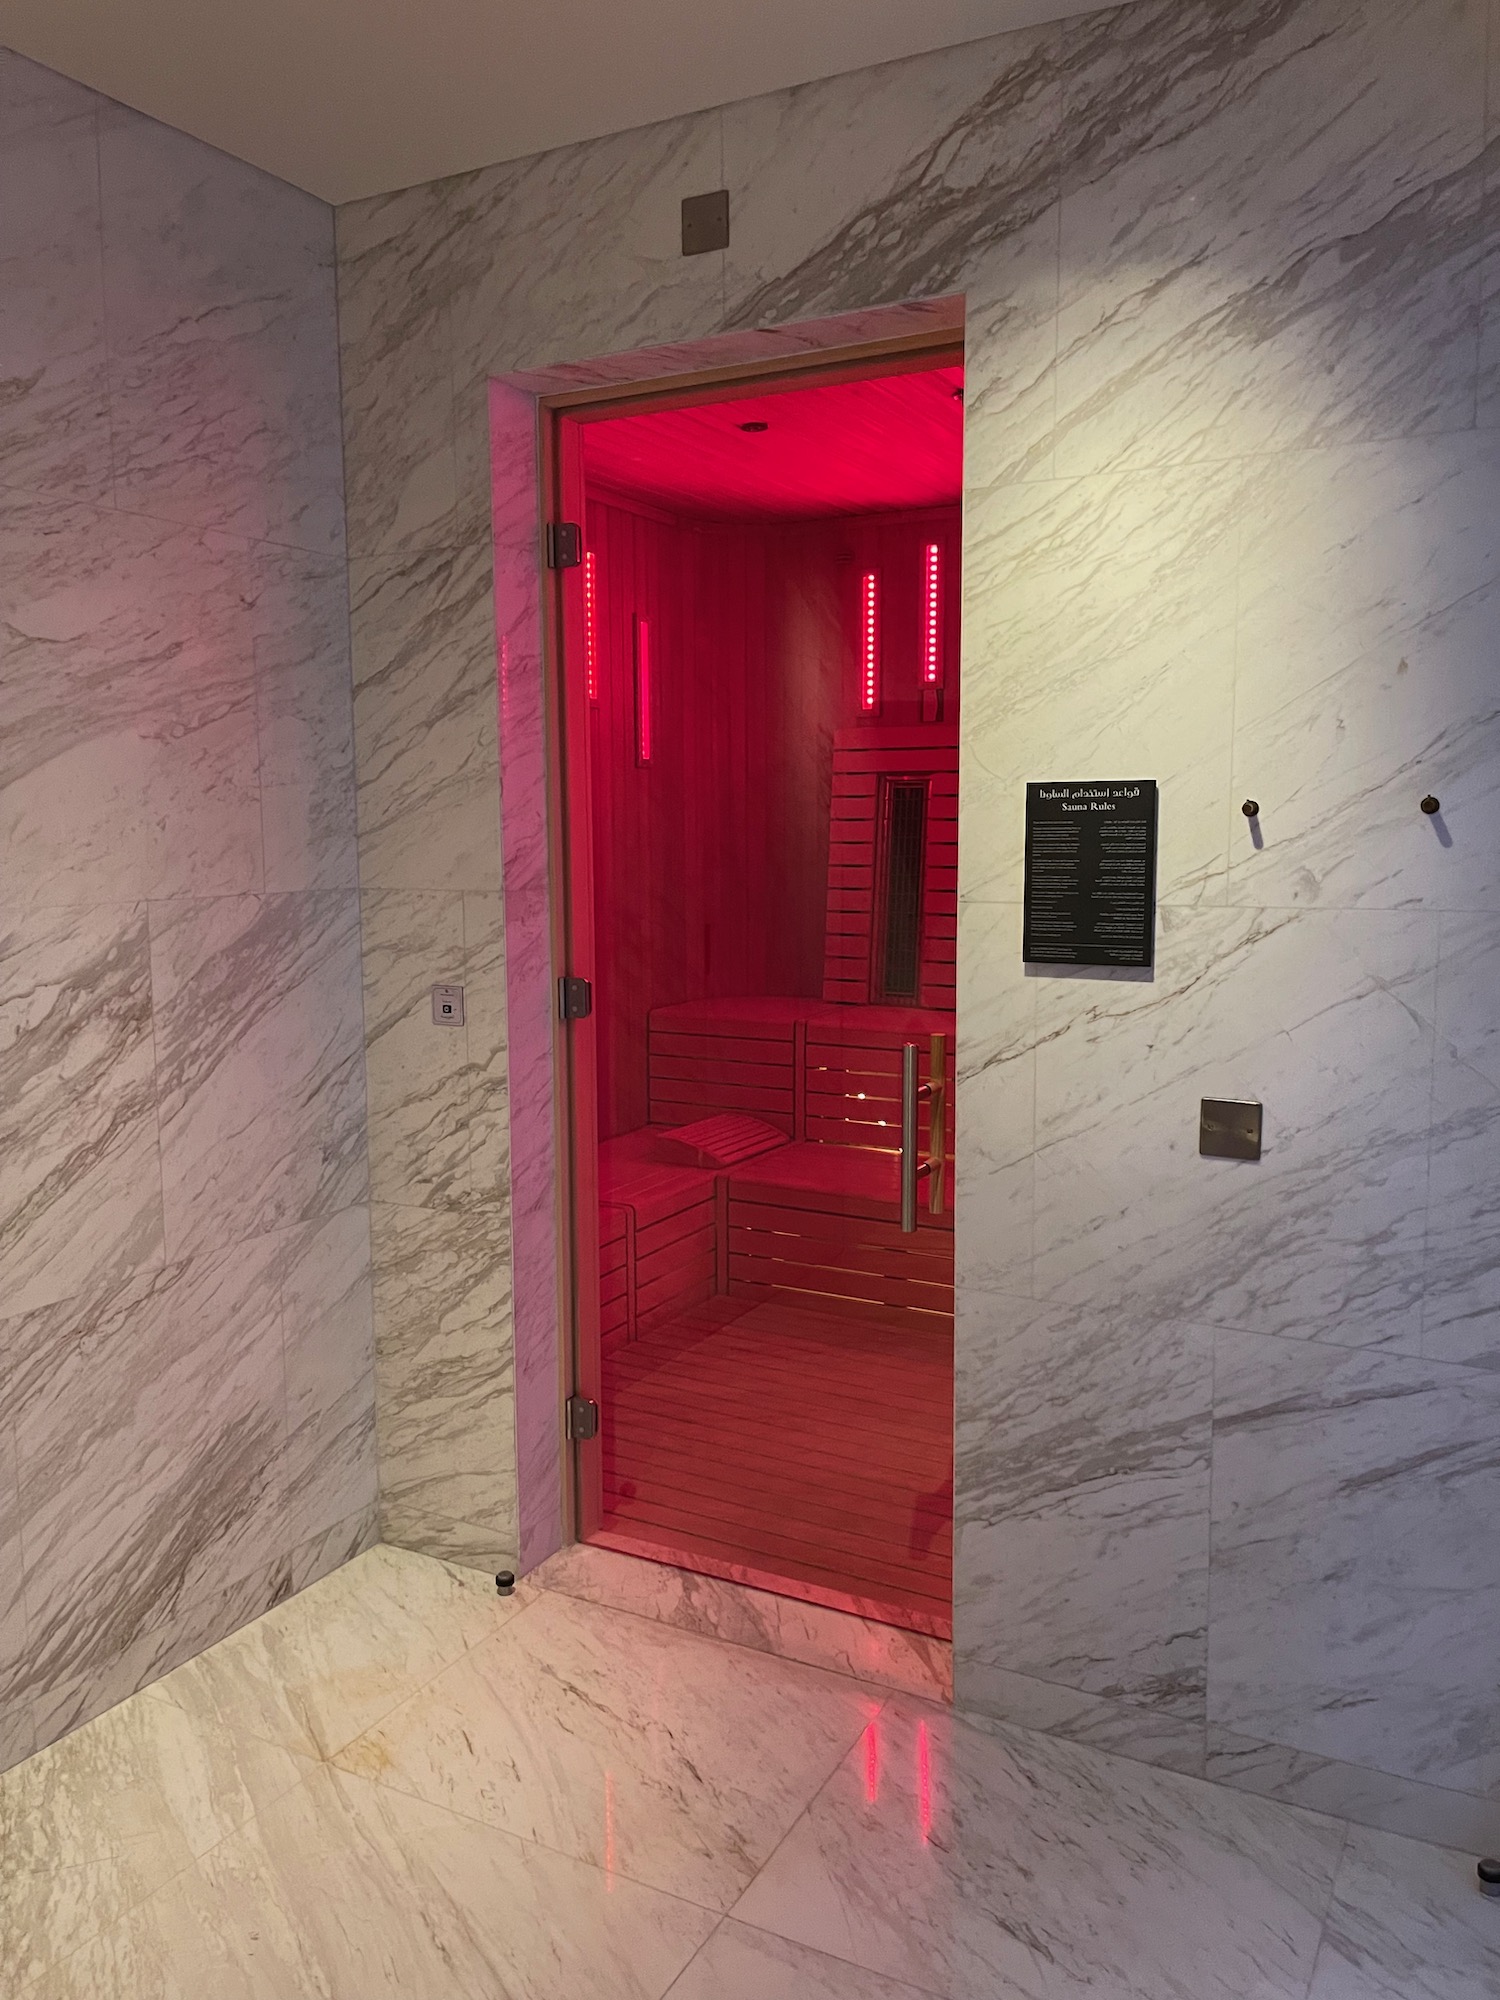 a door with red lights inside a room